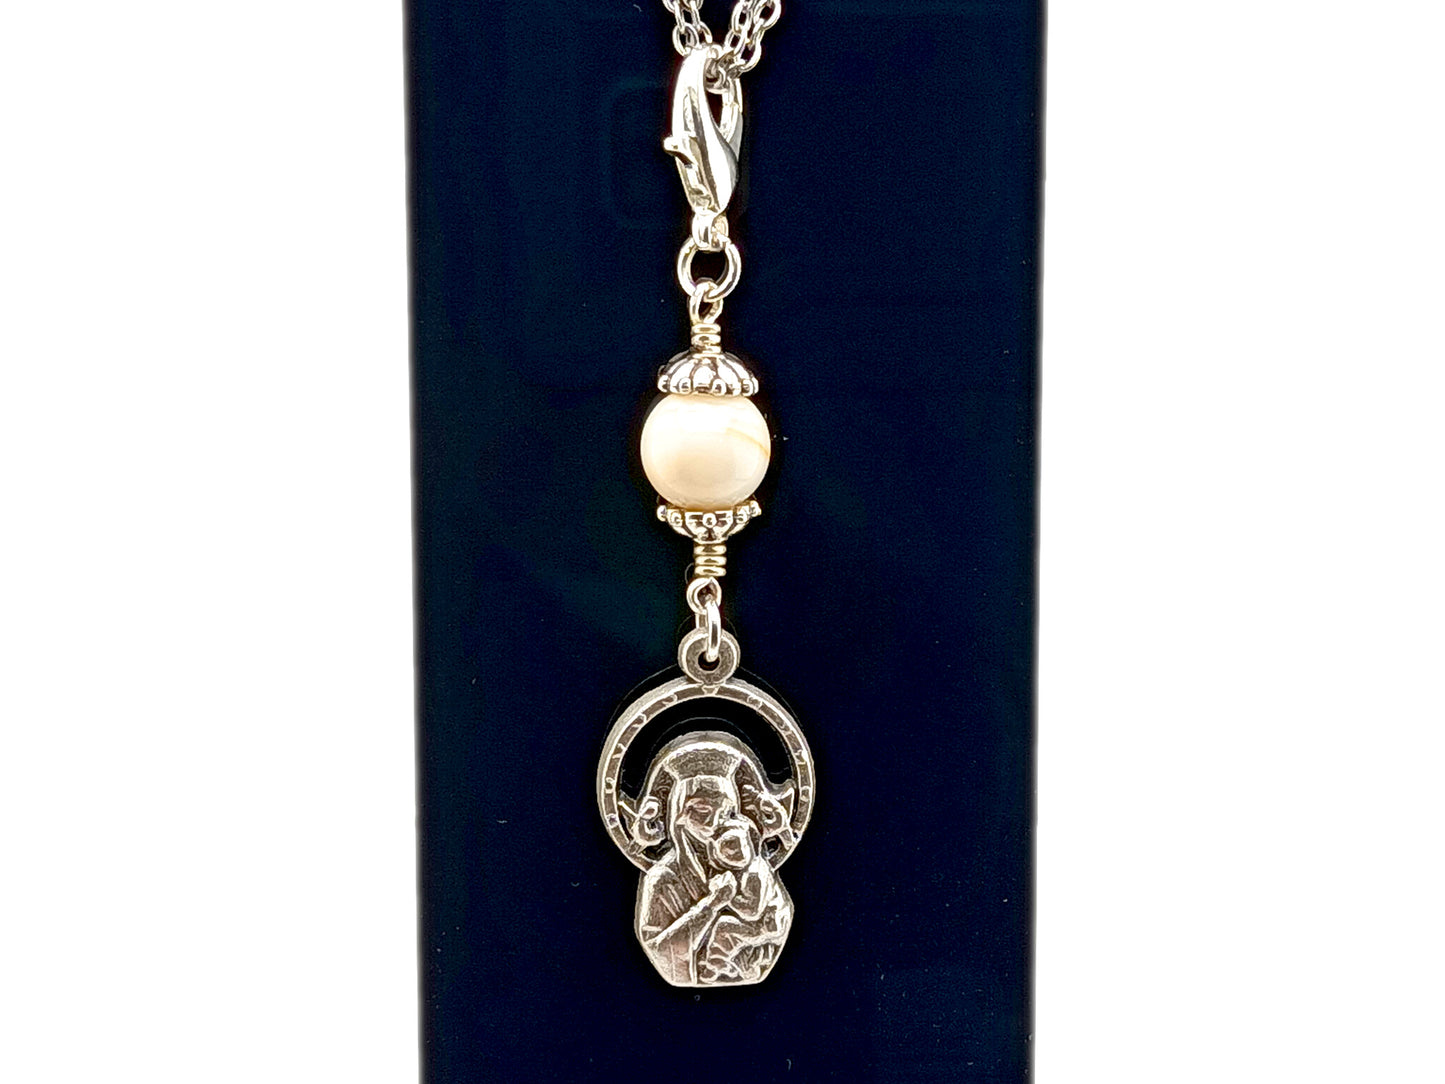 Immaculate Conception unique rosary beads purse clip key chain with mother of pearl bead in unbreakable wire wrapped style with lobster clasp.